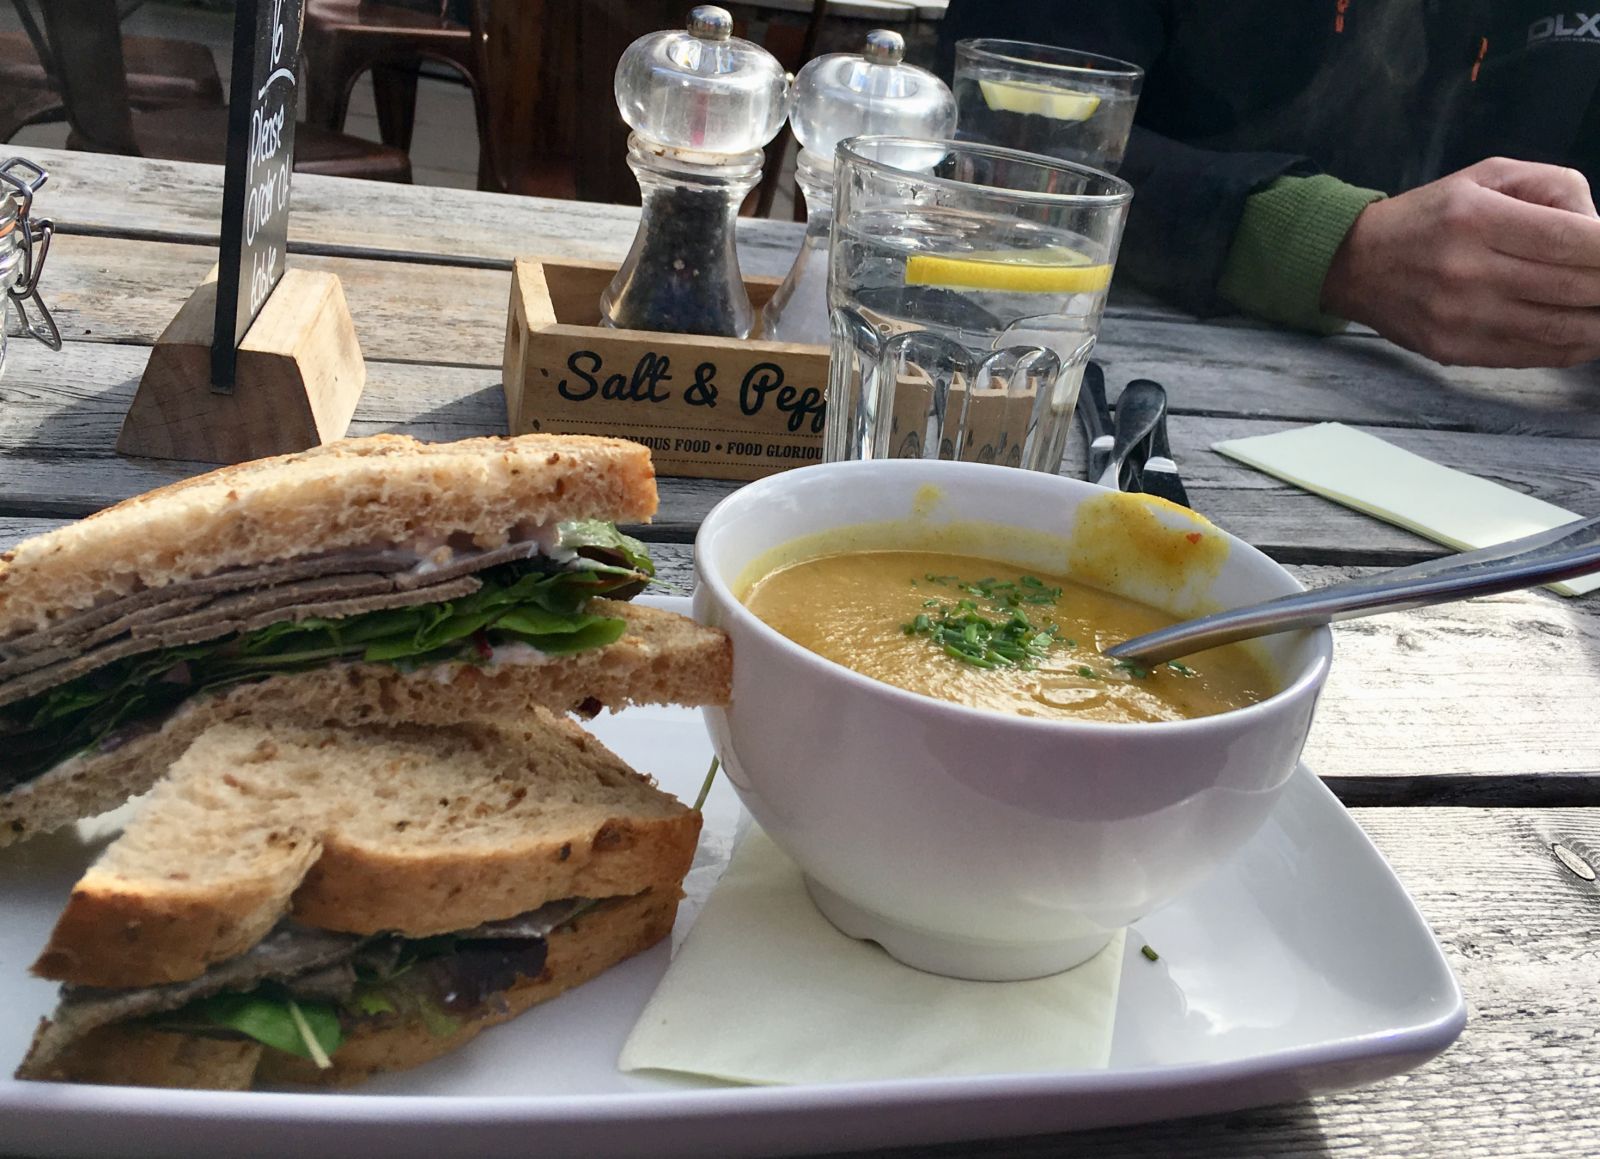 Photograph of a bowl of lentil soup with a brown bread sandwich.